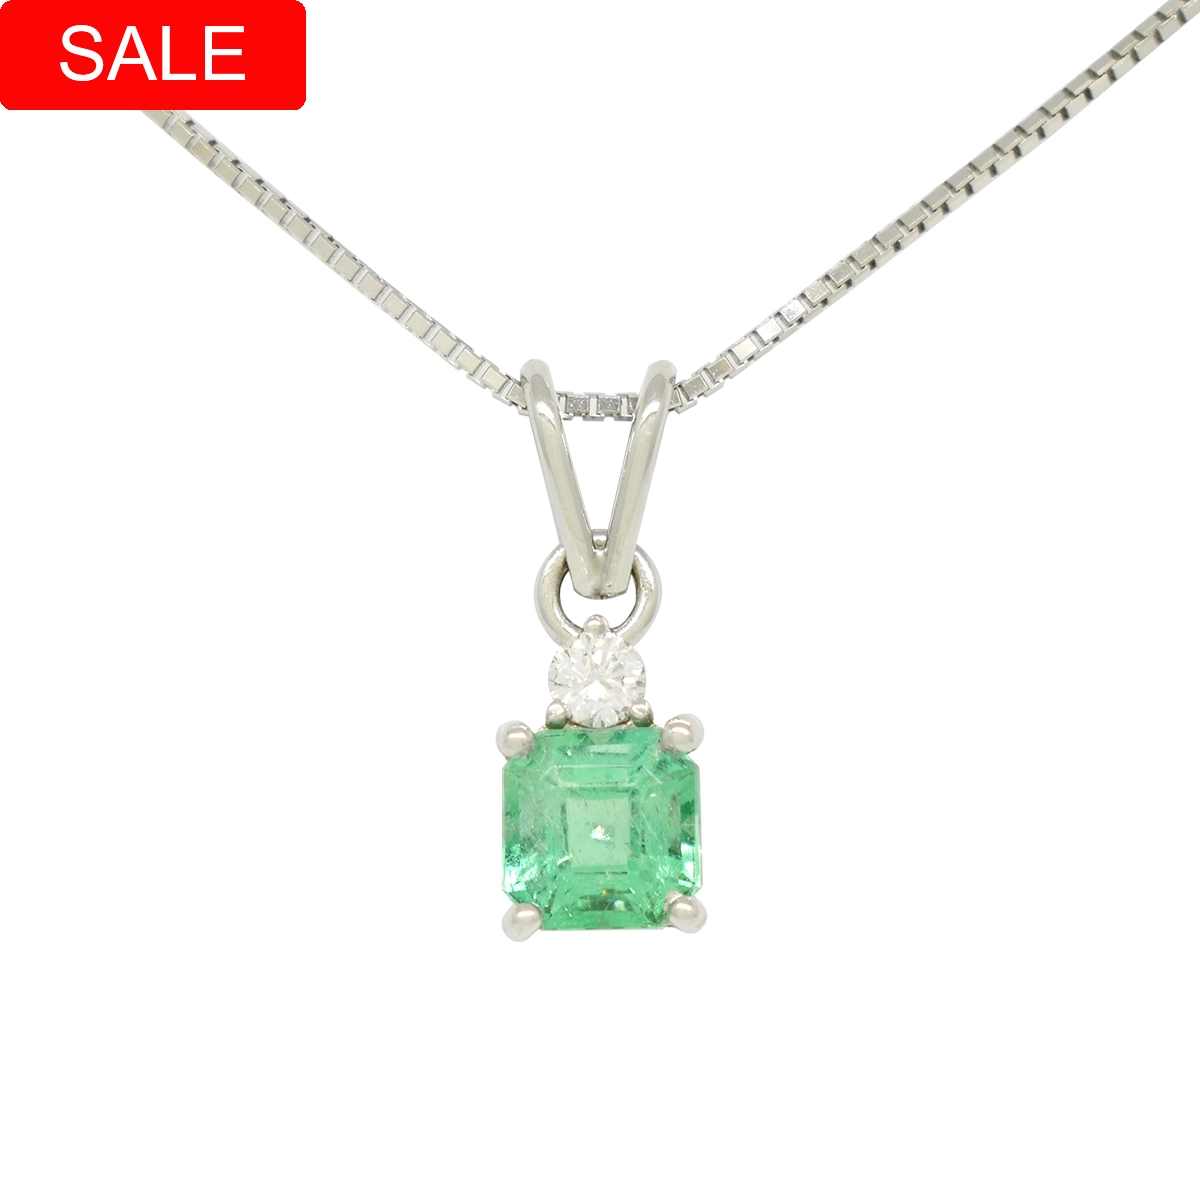 Square Emerald and Diamond Pendant in 18K White Gold Prong Setting